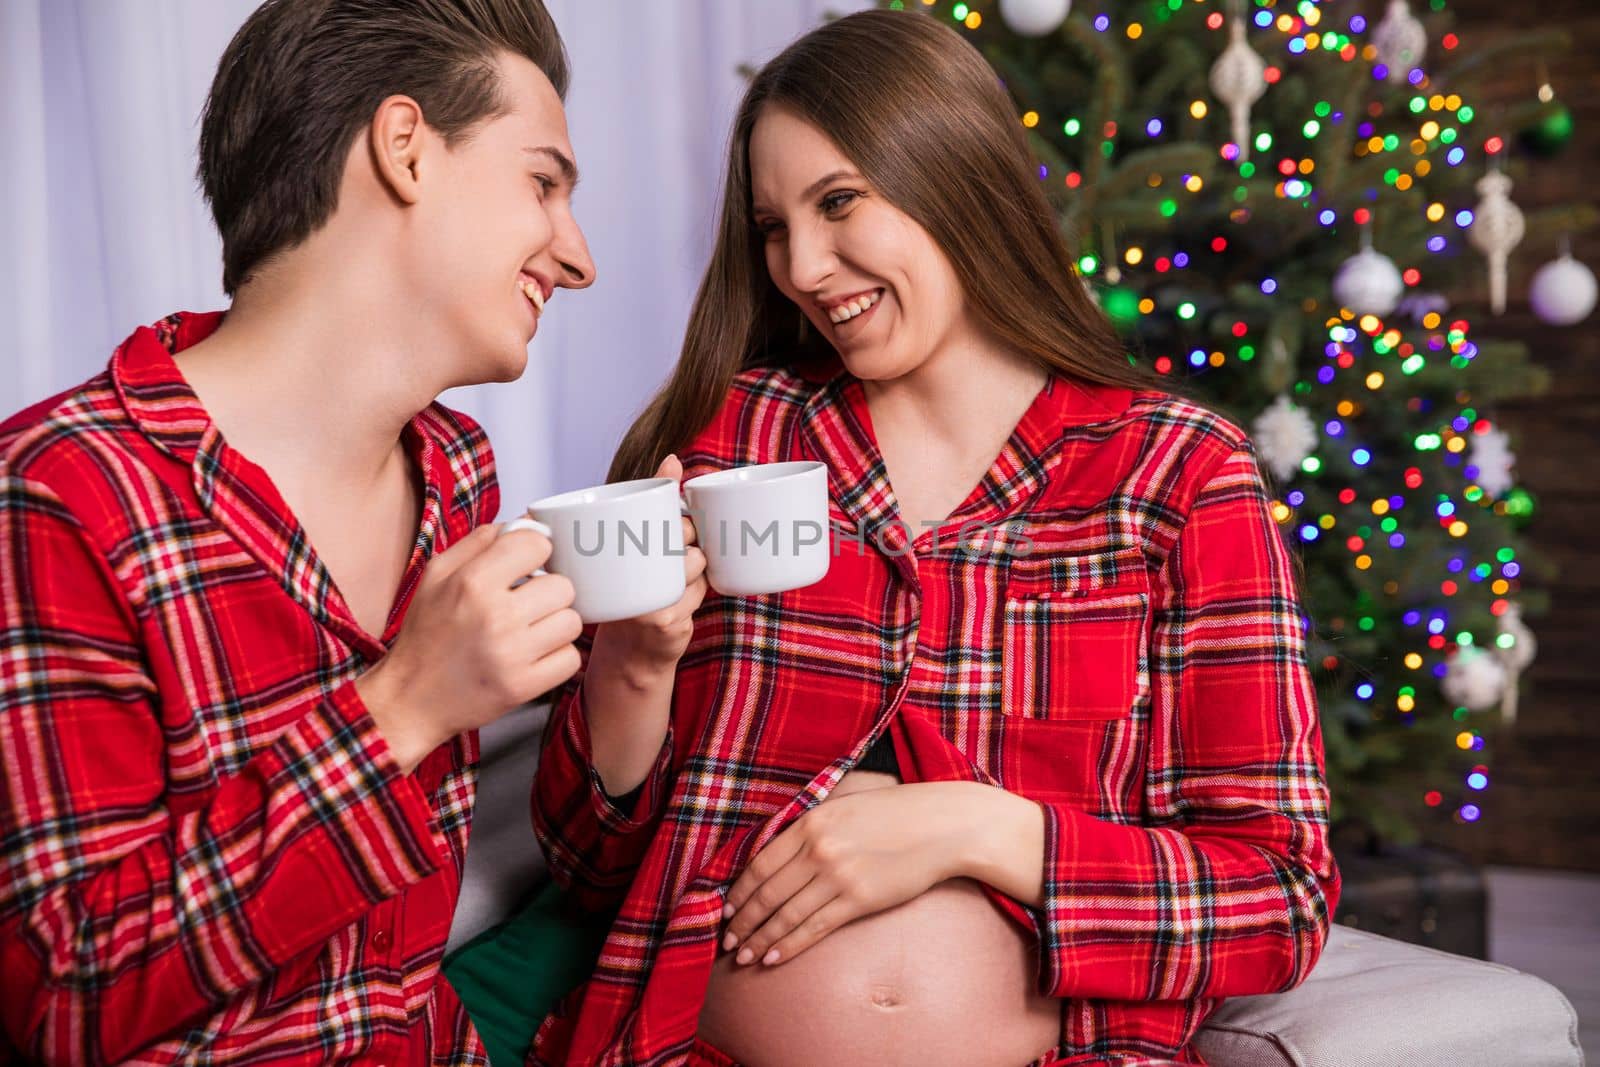 A man and a woman sit close to each other and turn their faces toward each other. The woman is advanced in pregnancy and has an exposed belly. The couple is smiling and holding white cups are toasting.